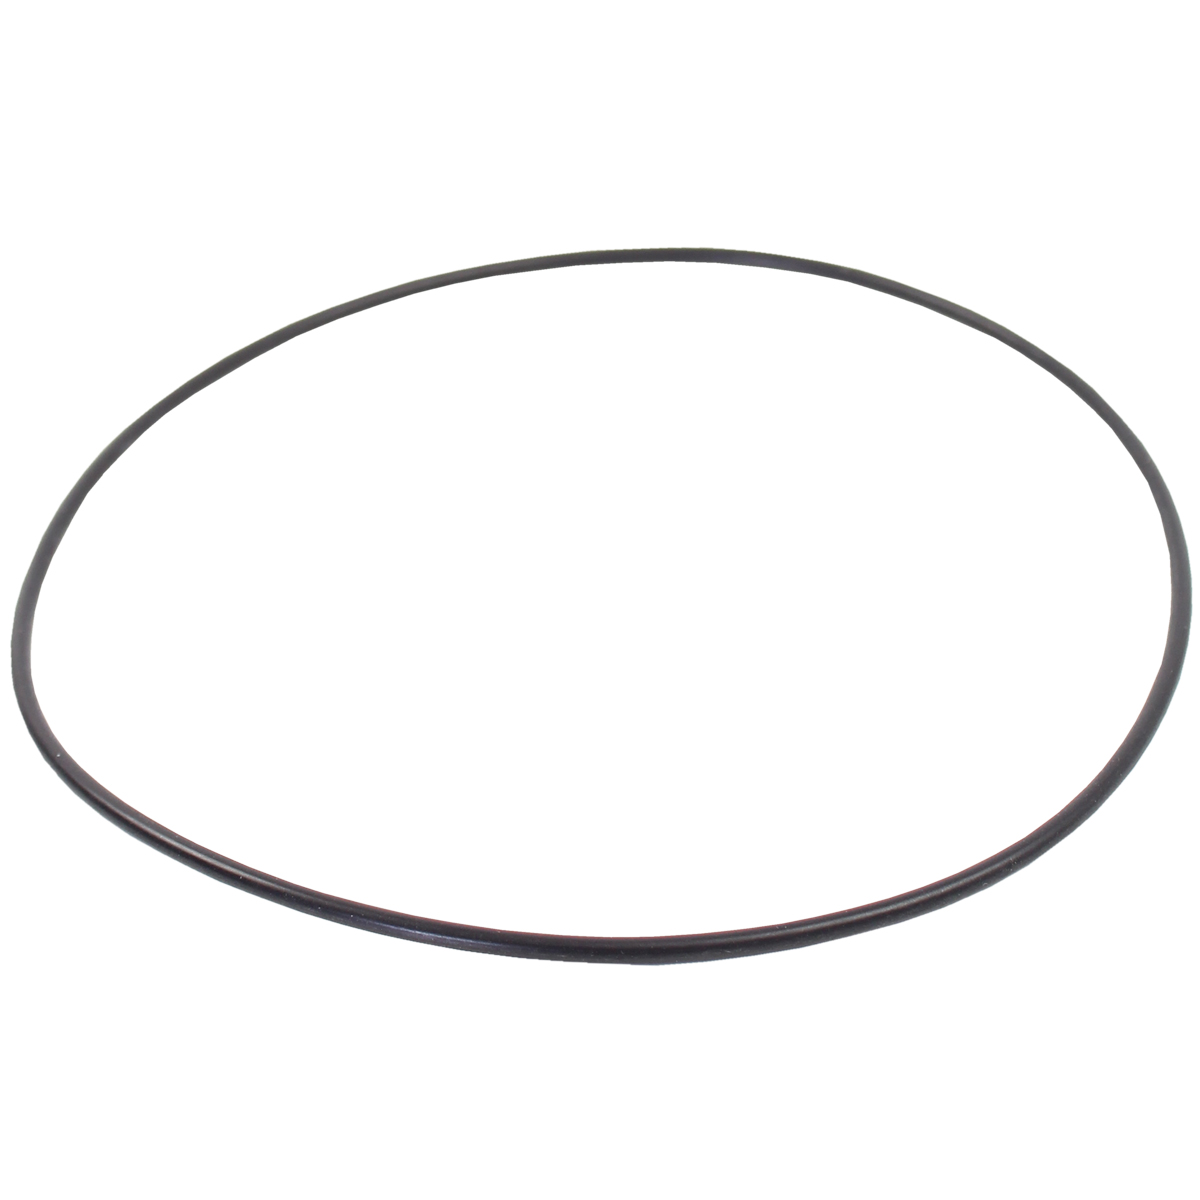 O-ring seal 120 x 2.5 mm (4.7 x 0.1 in.)